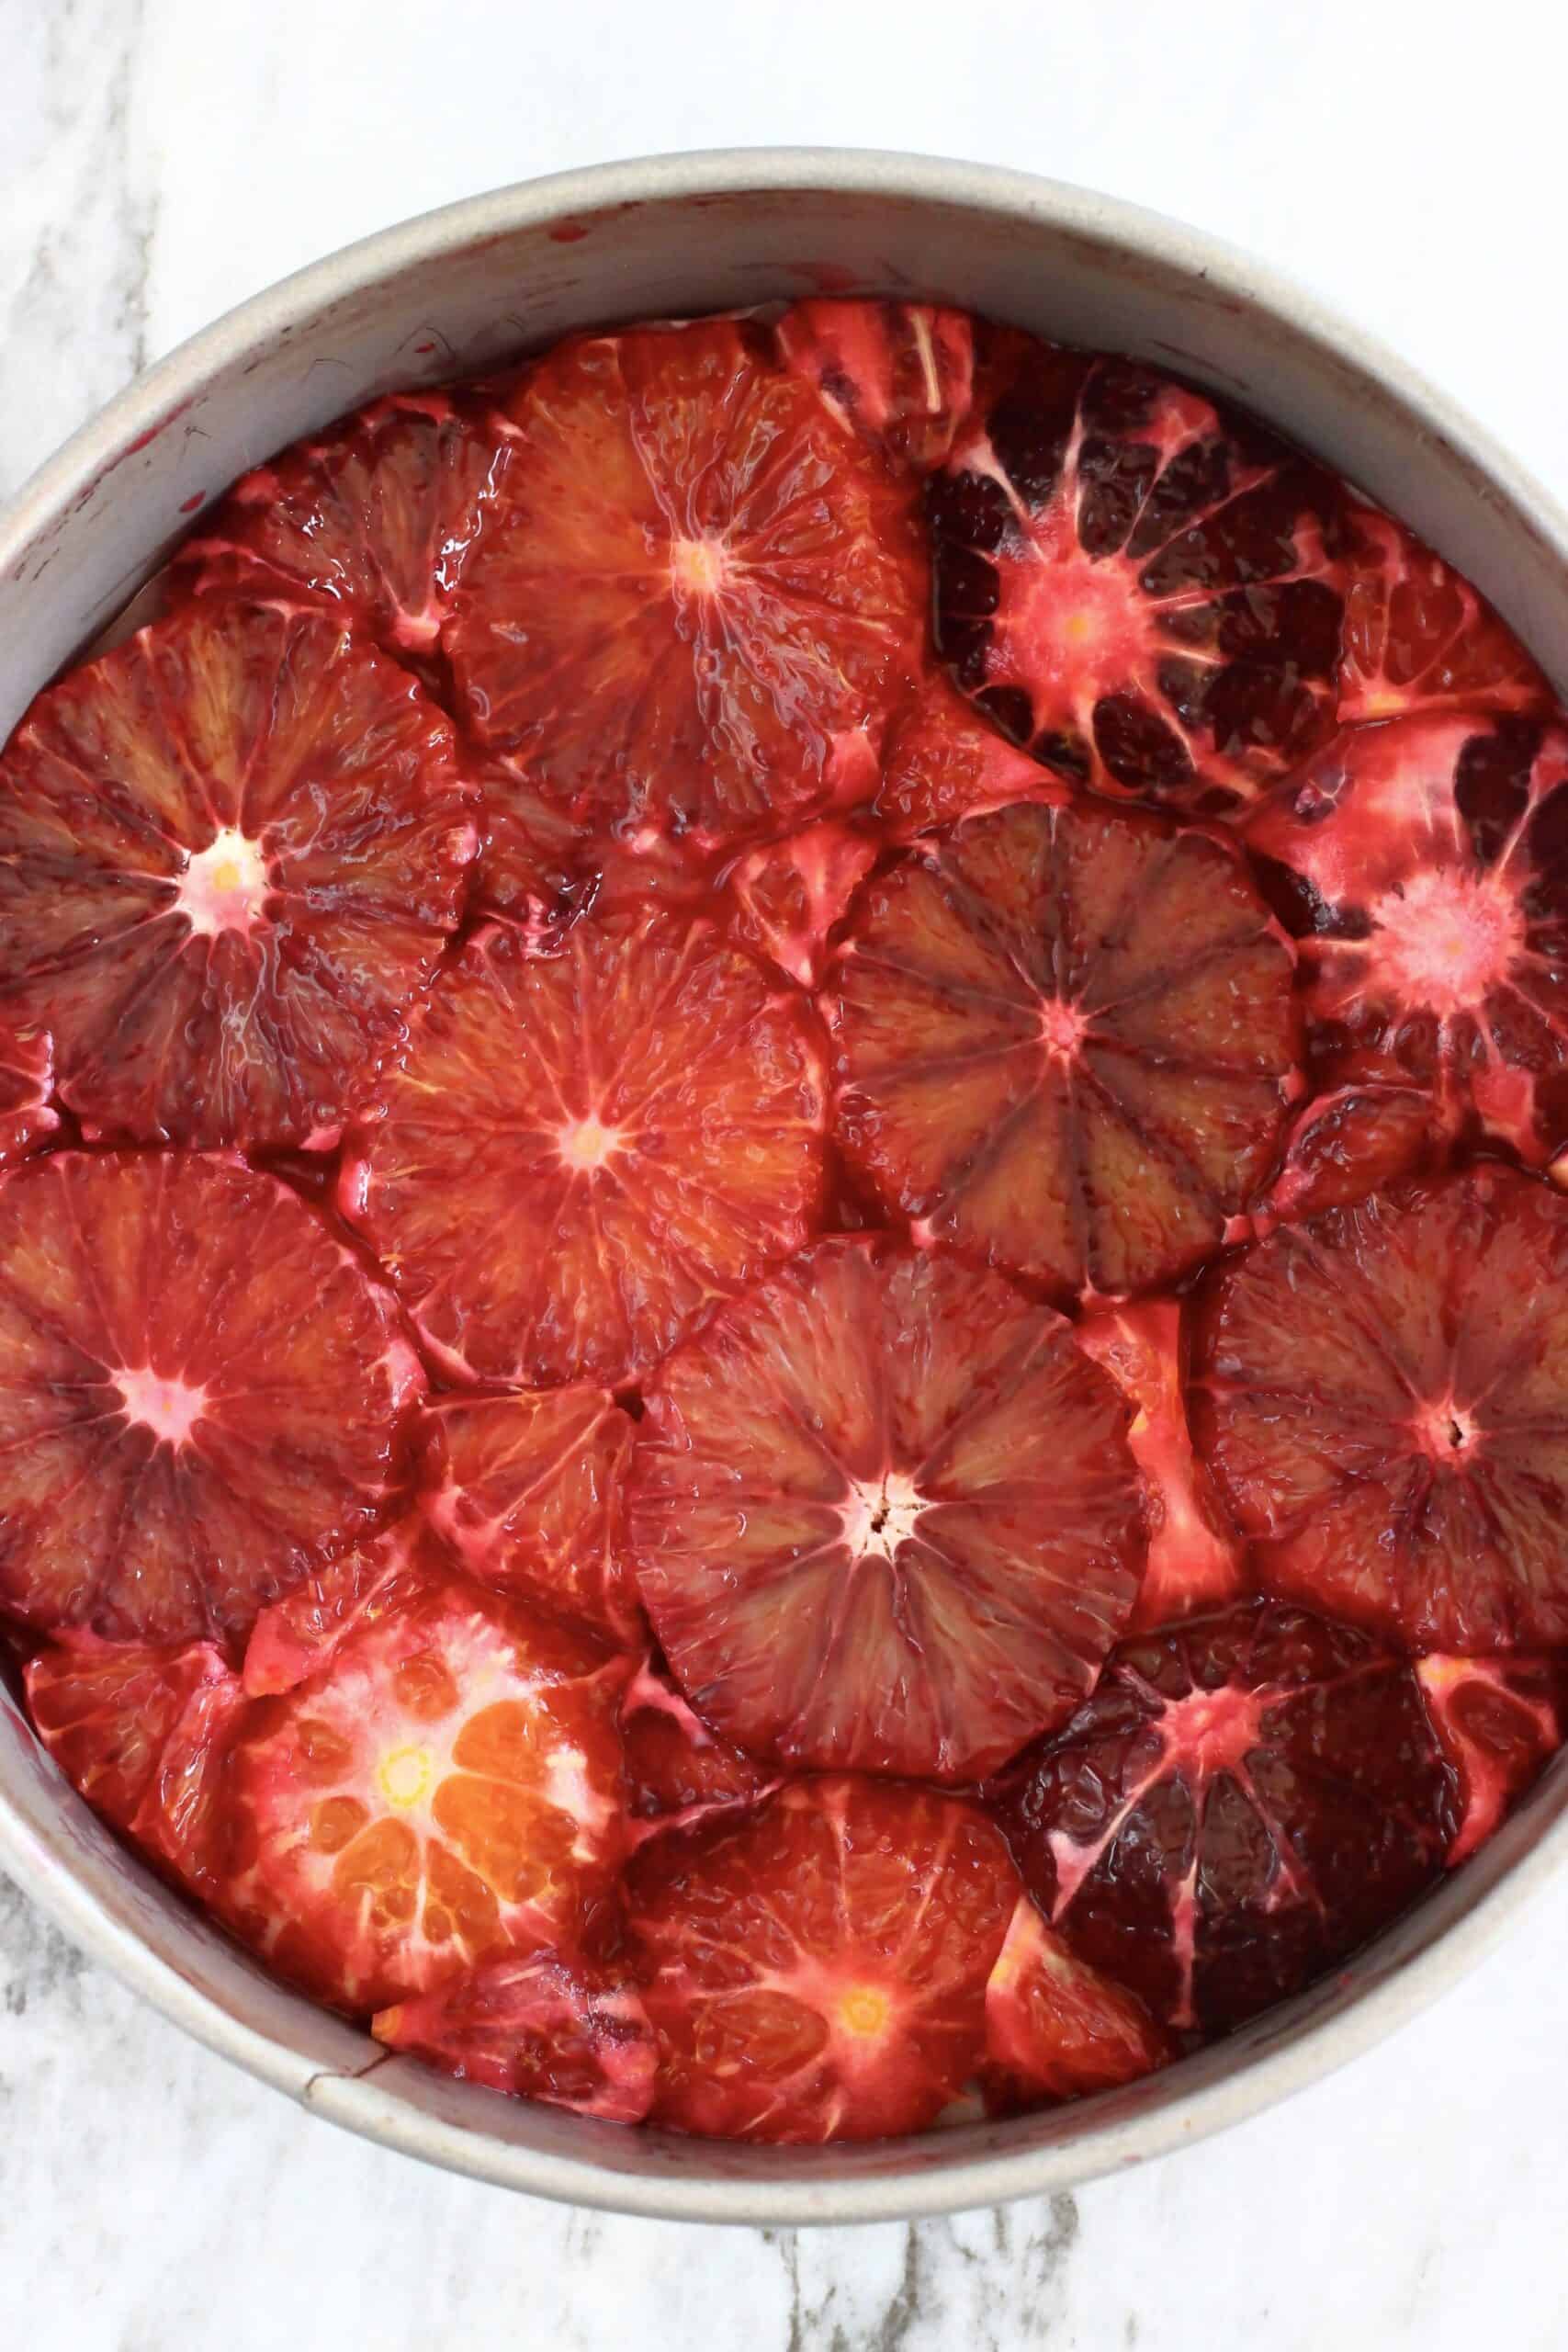 Blood orange slices laid out across the bottom of a round springform baking tin lined with baking paper